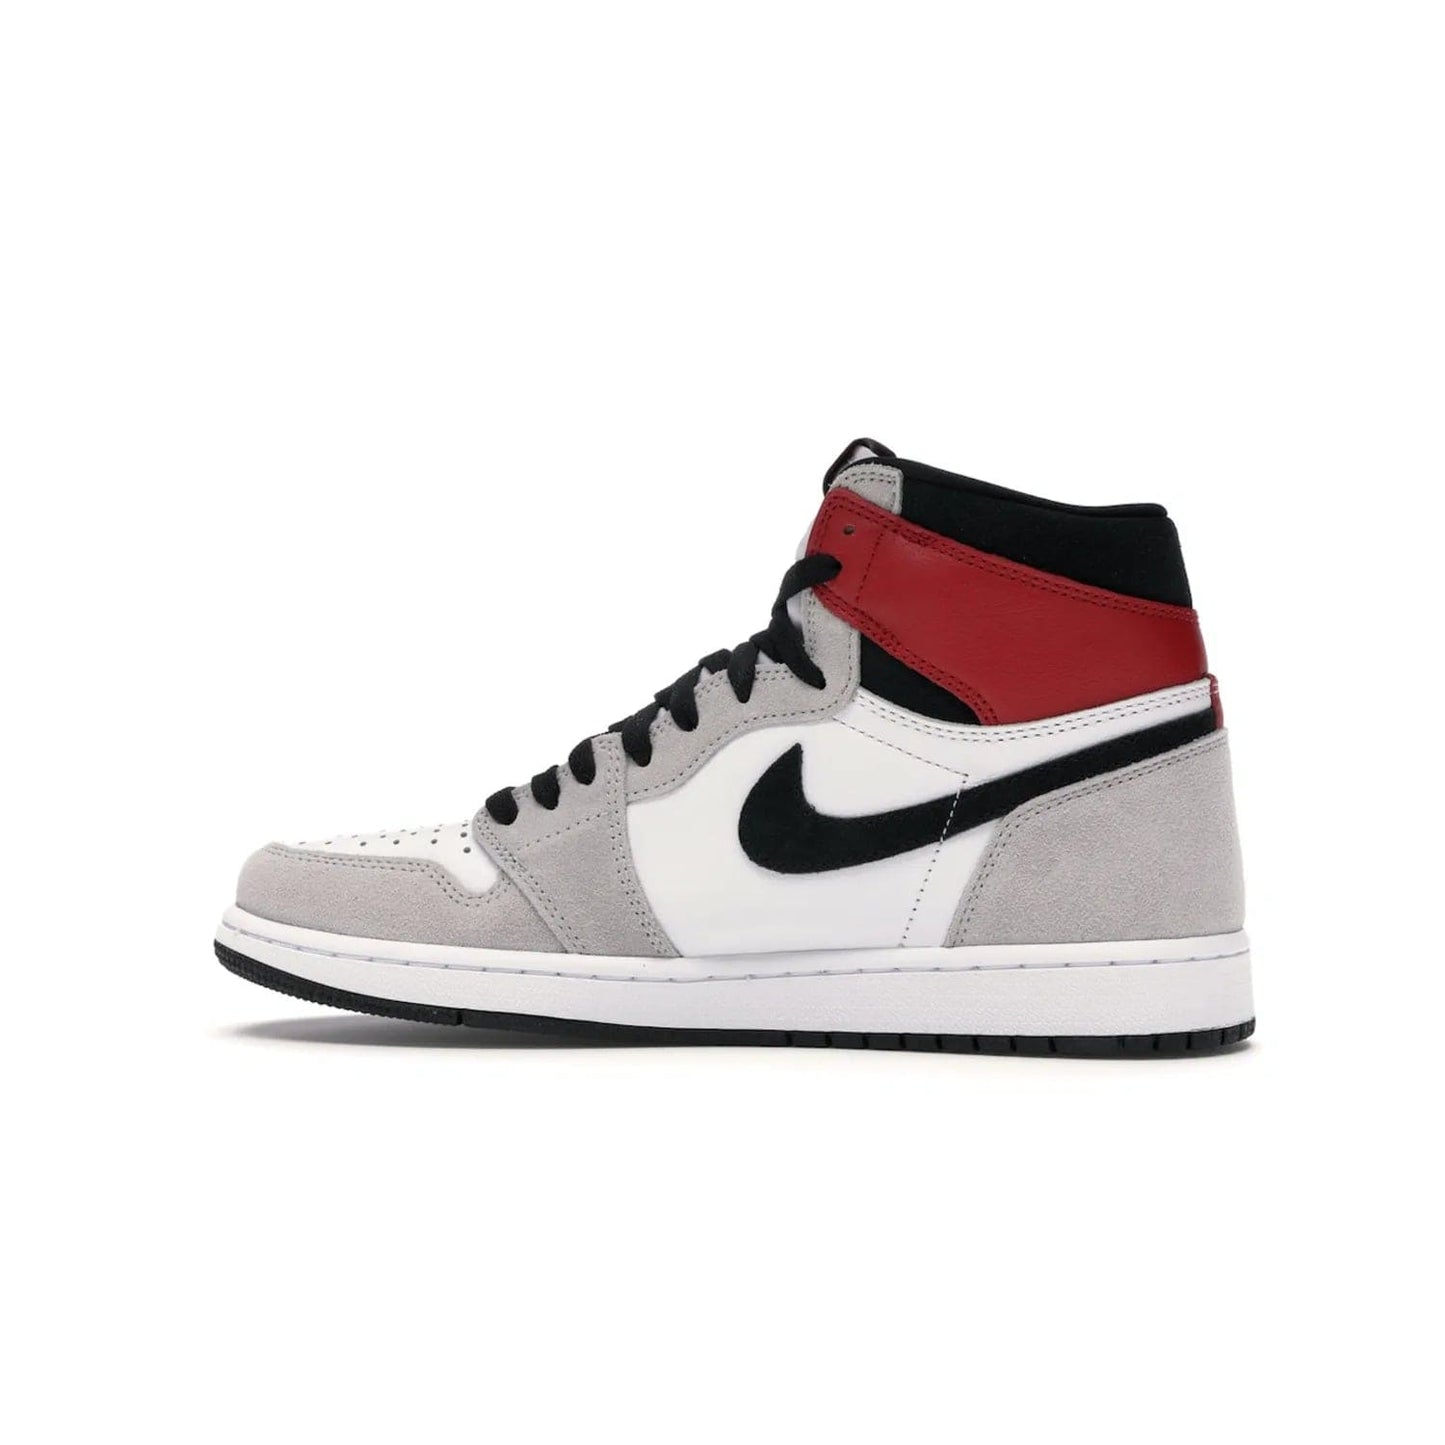 Jordan 1 Retro High Light Smoke Grey - Image 20 - Only at www.BallersClubKickz.com - Comfortable and stylish, Jordan 1 Retro High Light Smoke Grey offers a unique spin on a classic design. White leather, grey suede, red leather and black details are set on a white midsole and black outsole. Get the sneaker released in July 2020 and add a twist to your wardrobe.